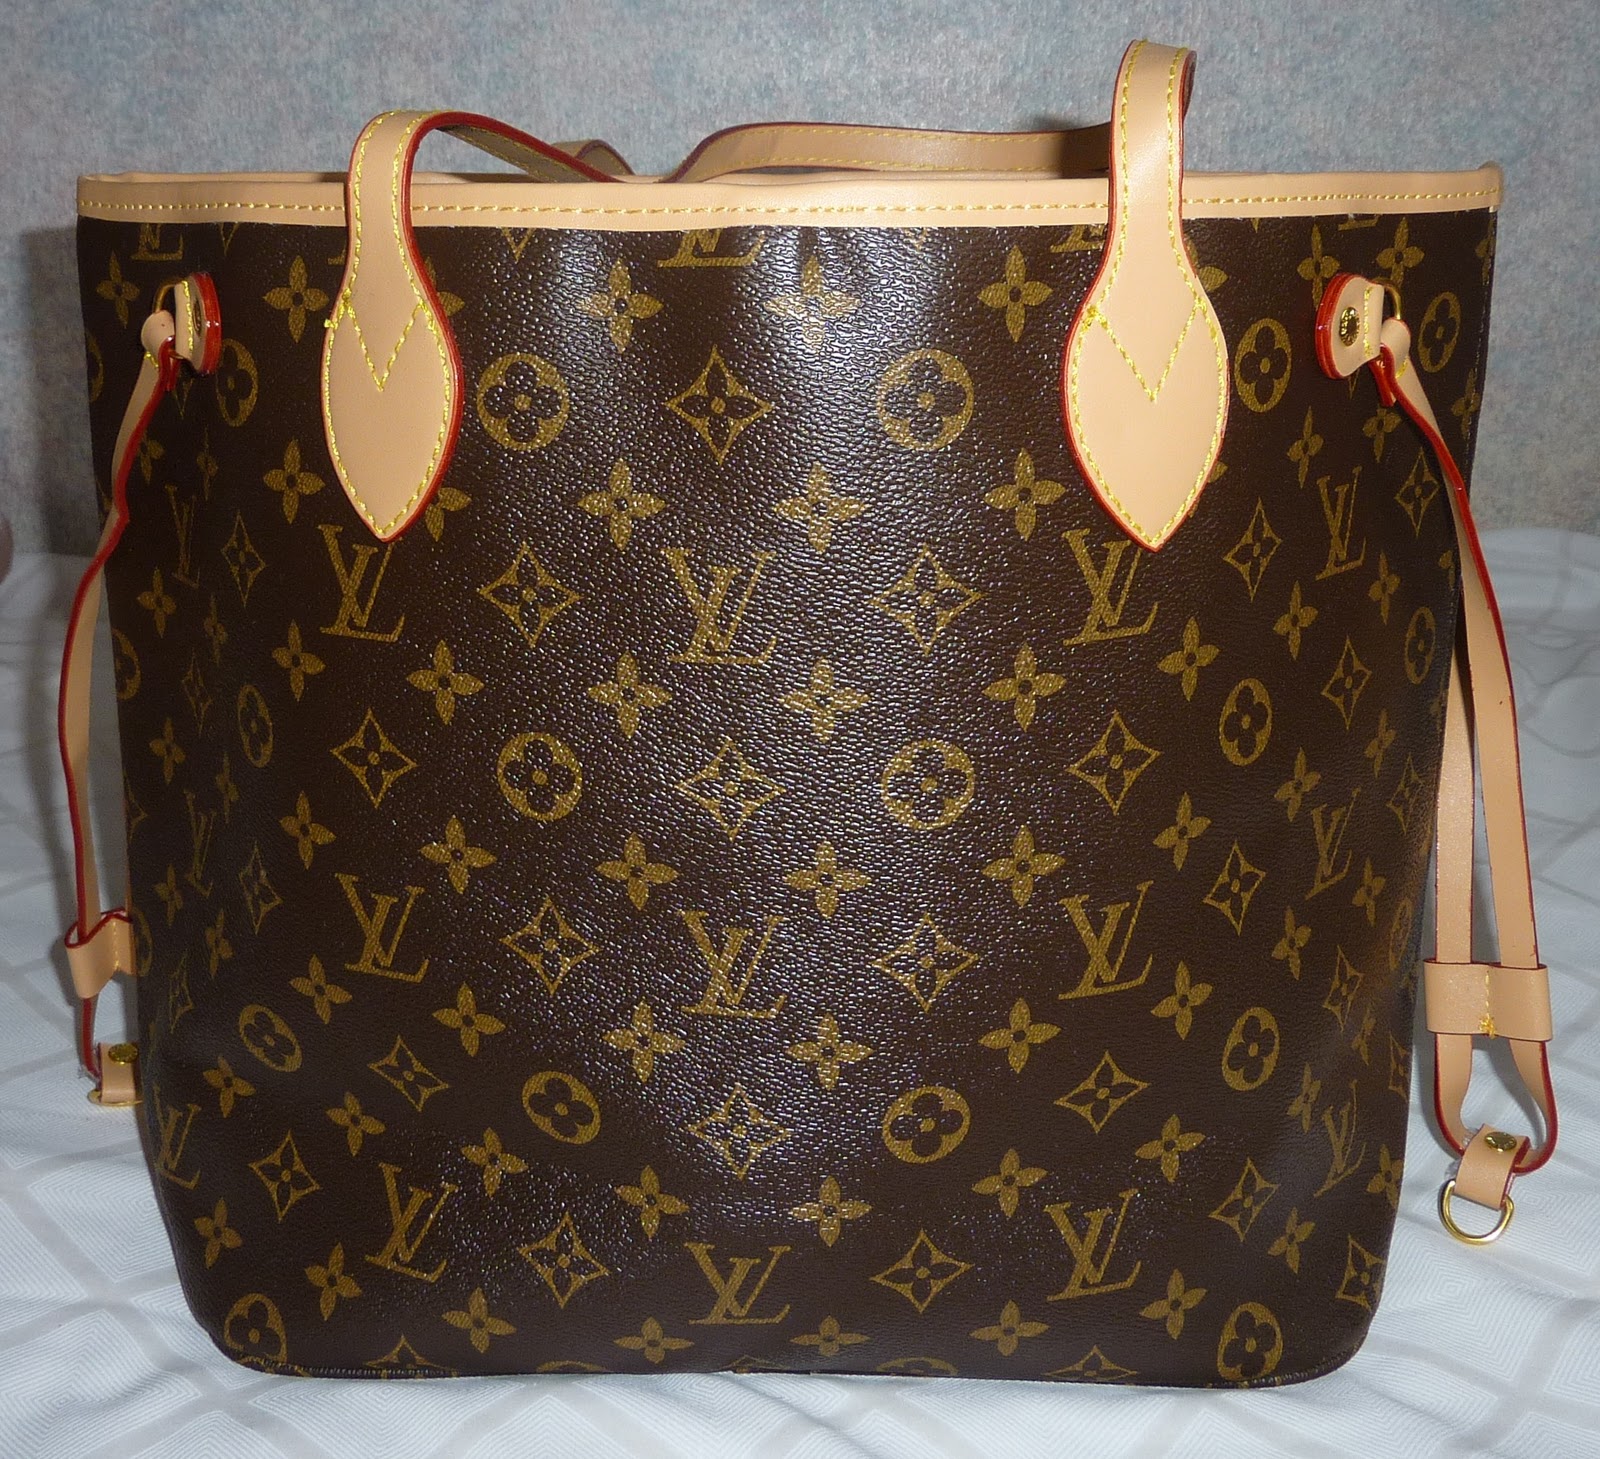 Louis Vuitton Handbags Tote Bags - Up To 80% Off